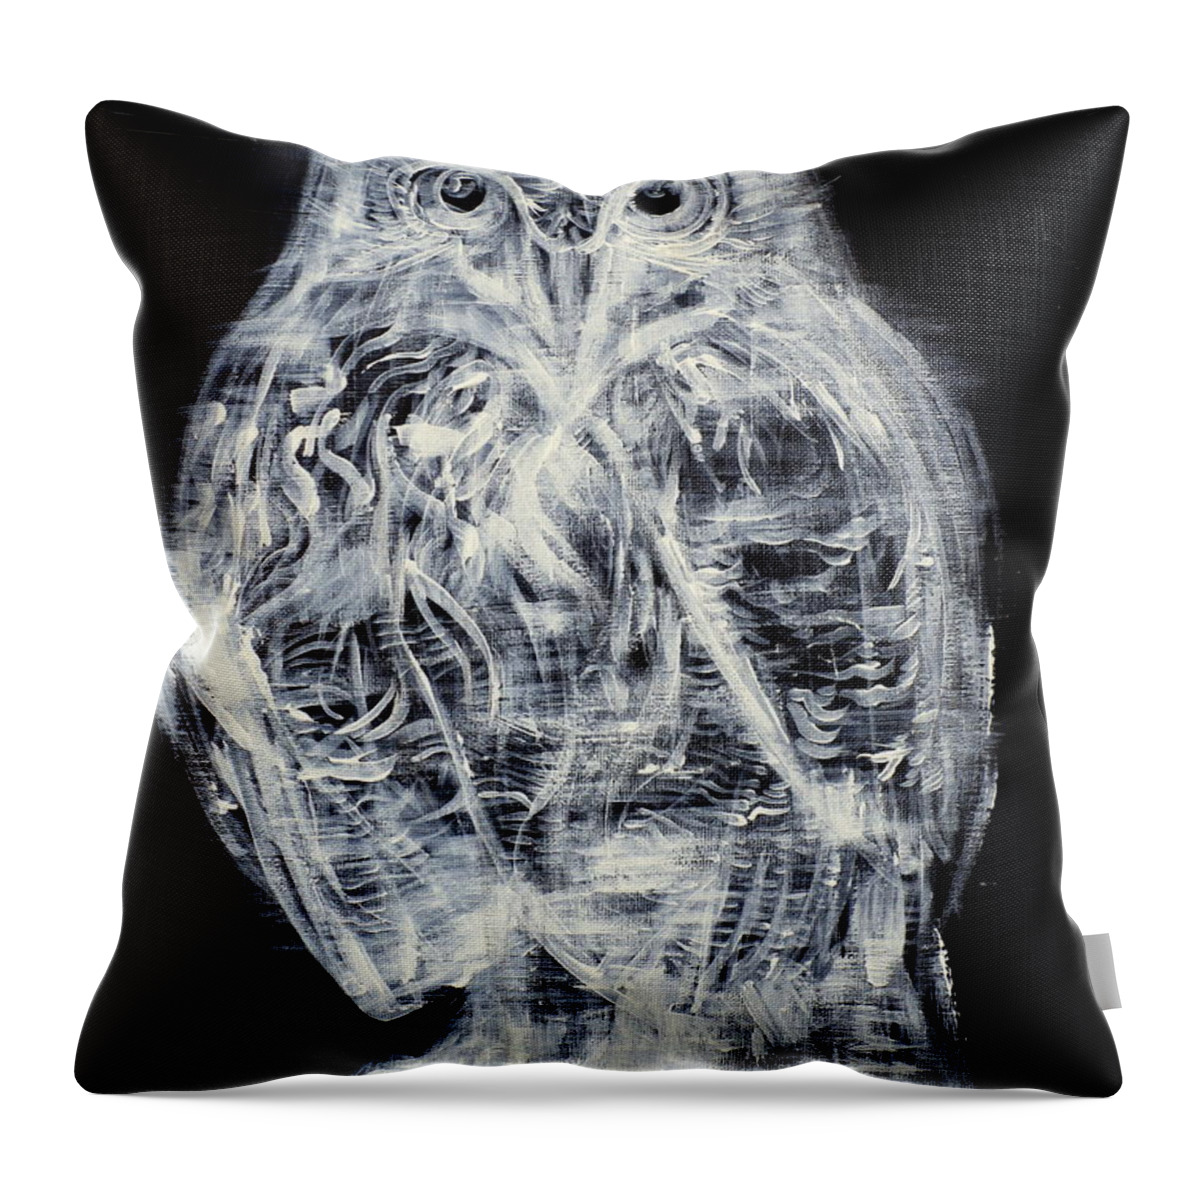 Owl Throw Pillow featuring the painting OWL by Fabrizio Cassetta